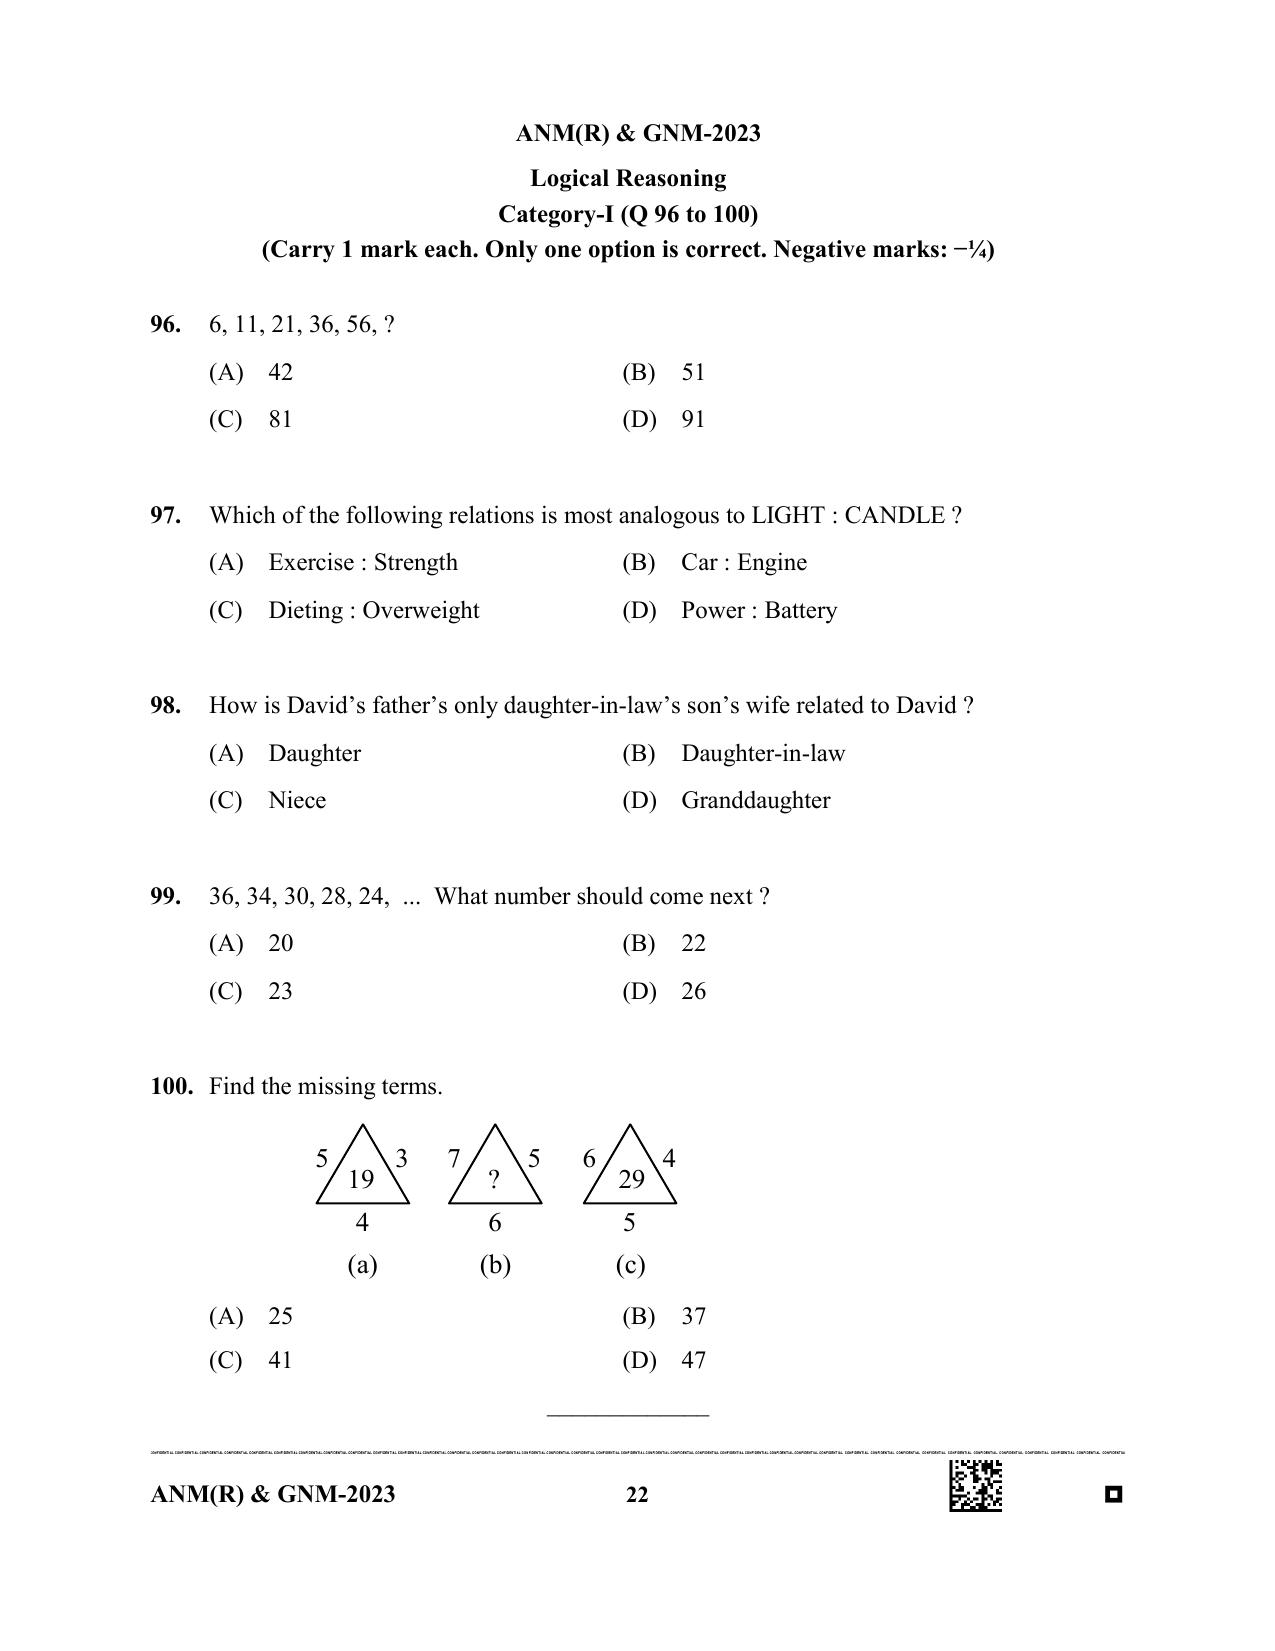 WB ANM GNM 2023 Question Paper - Page 22